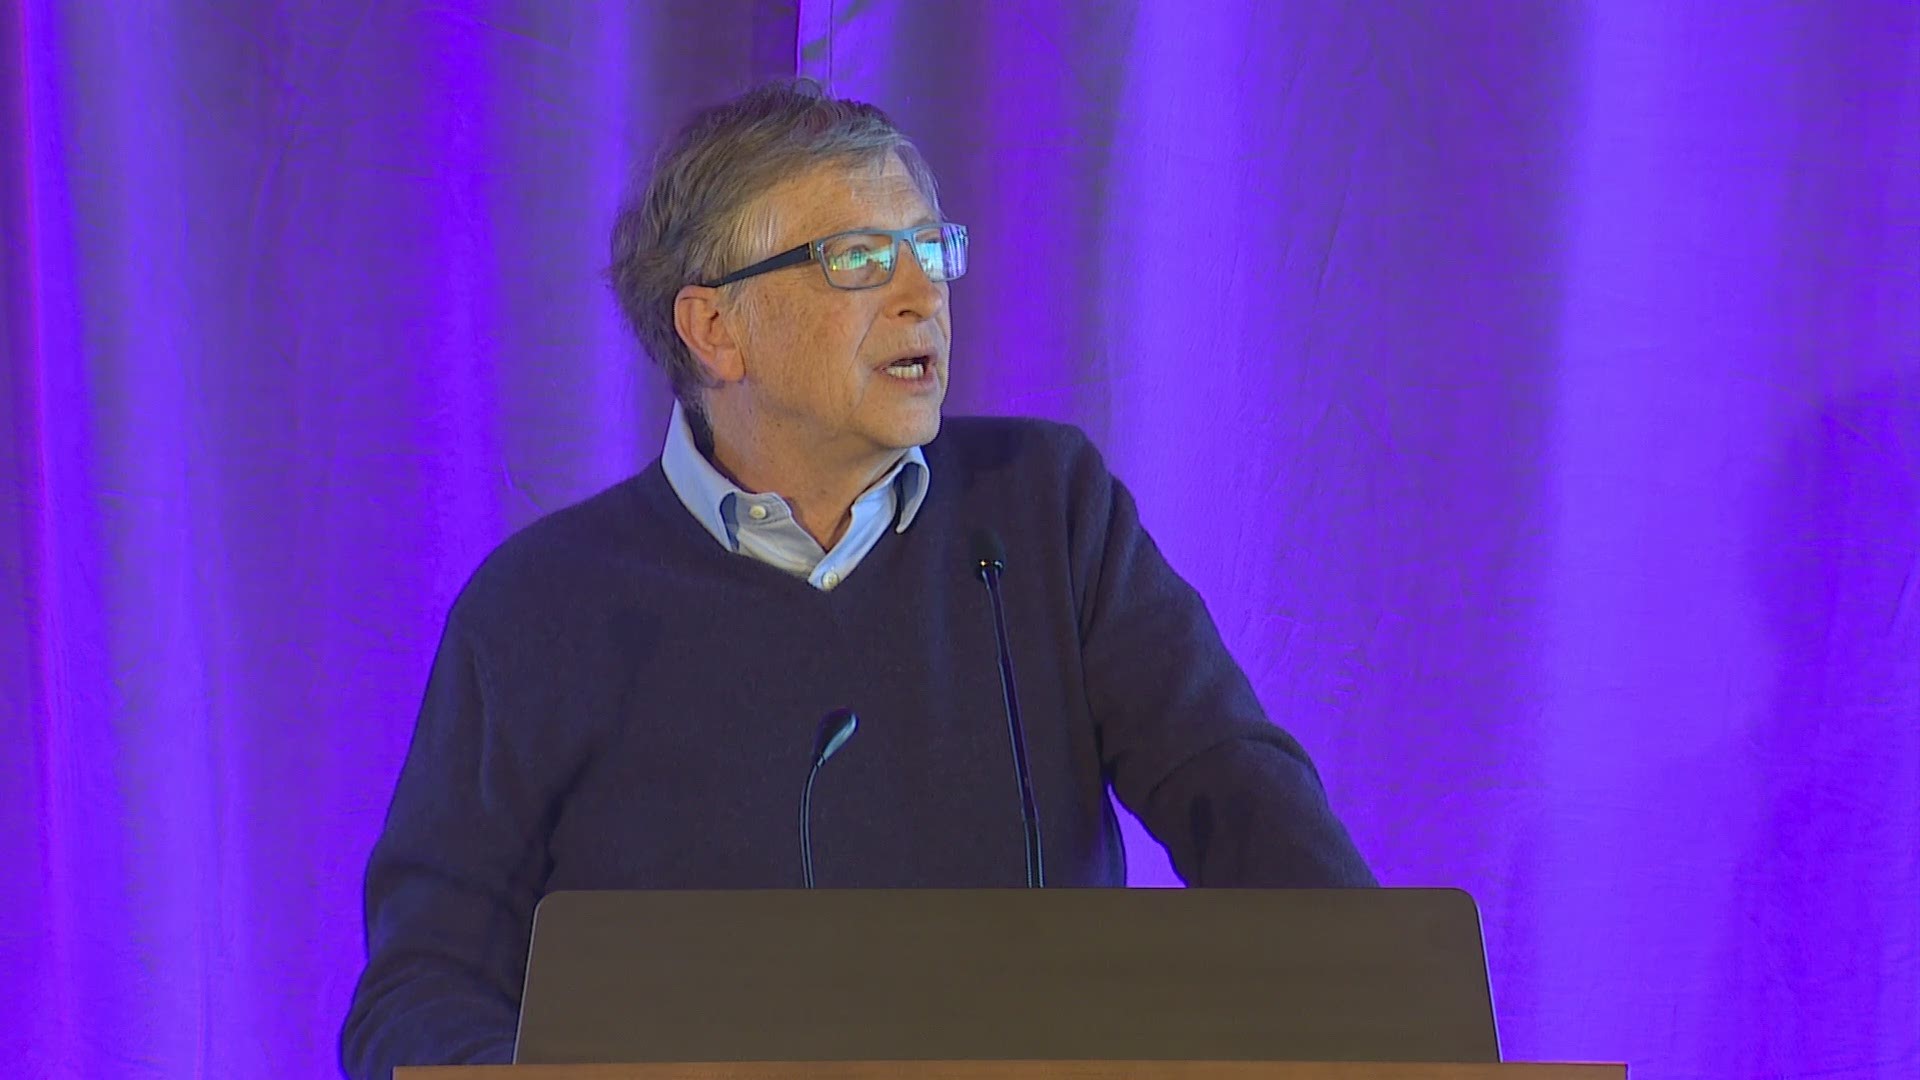 Bill Gates recalls the days when he and Paul Allen spent time in the University of Washington tinkering with the university’s computers.